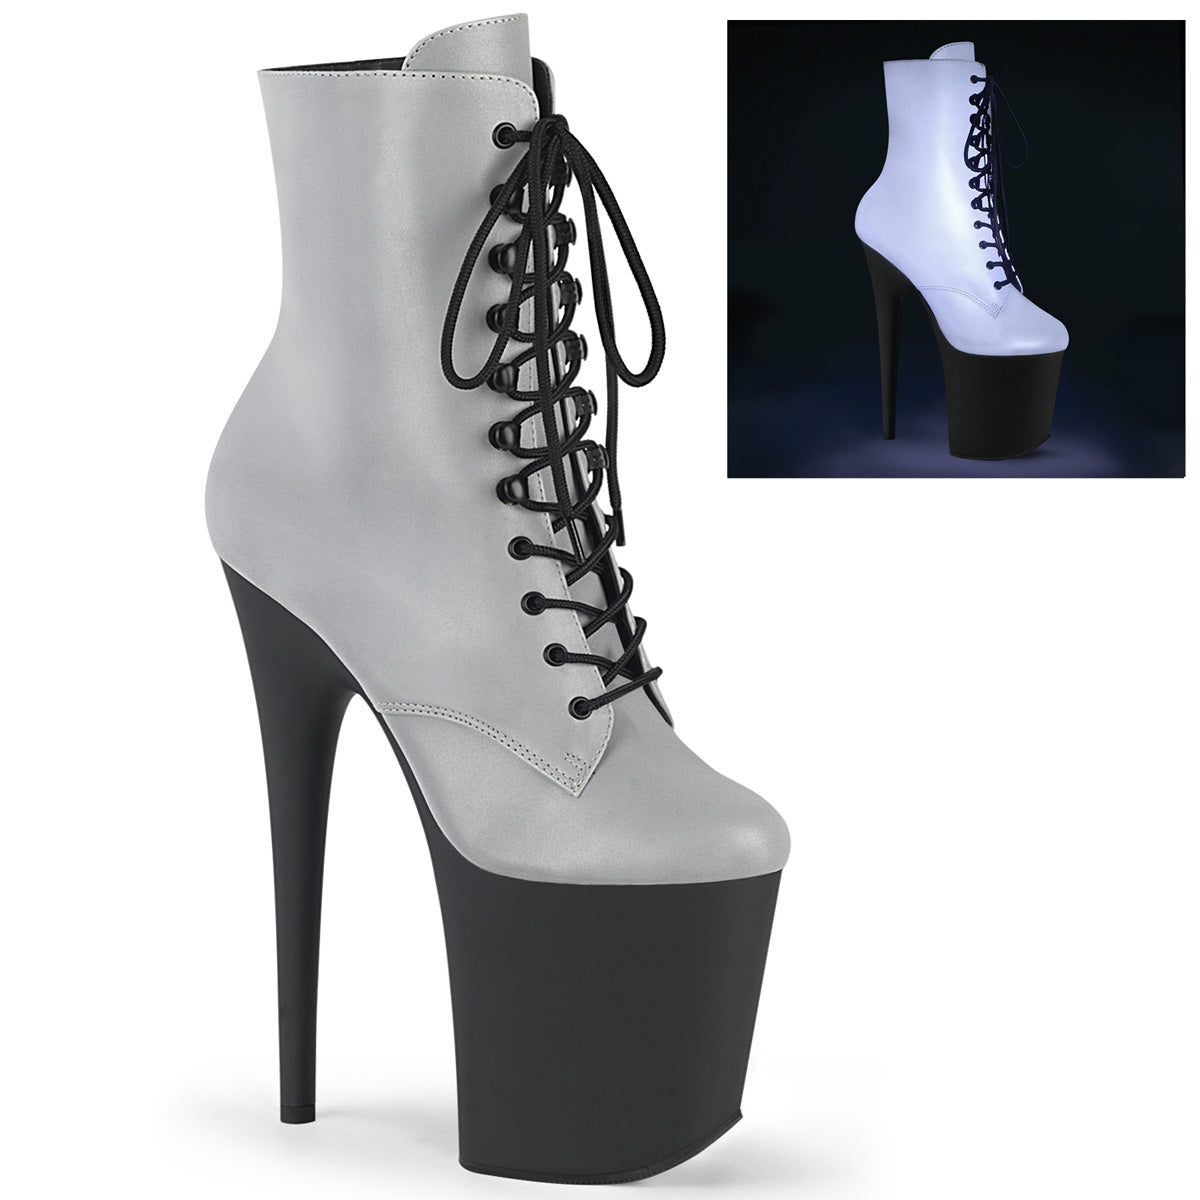 Pleaser FLAMINGO-1020REFL Silver Reflective 8 Inch (200mm) Heel, 4 Inch (100mm) Platform Lace-Up Front Ankle Boot Featuring Reflective Upper, Inside Zip Closure